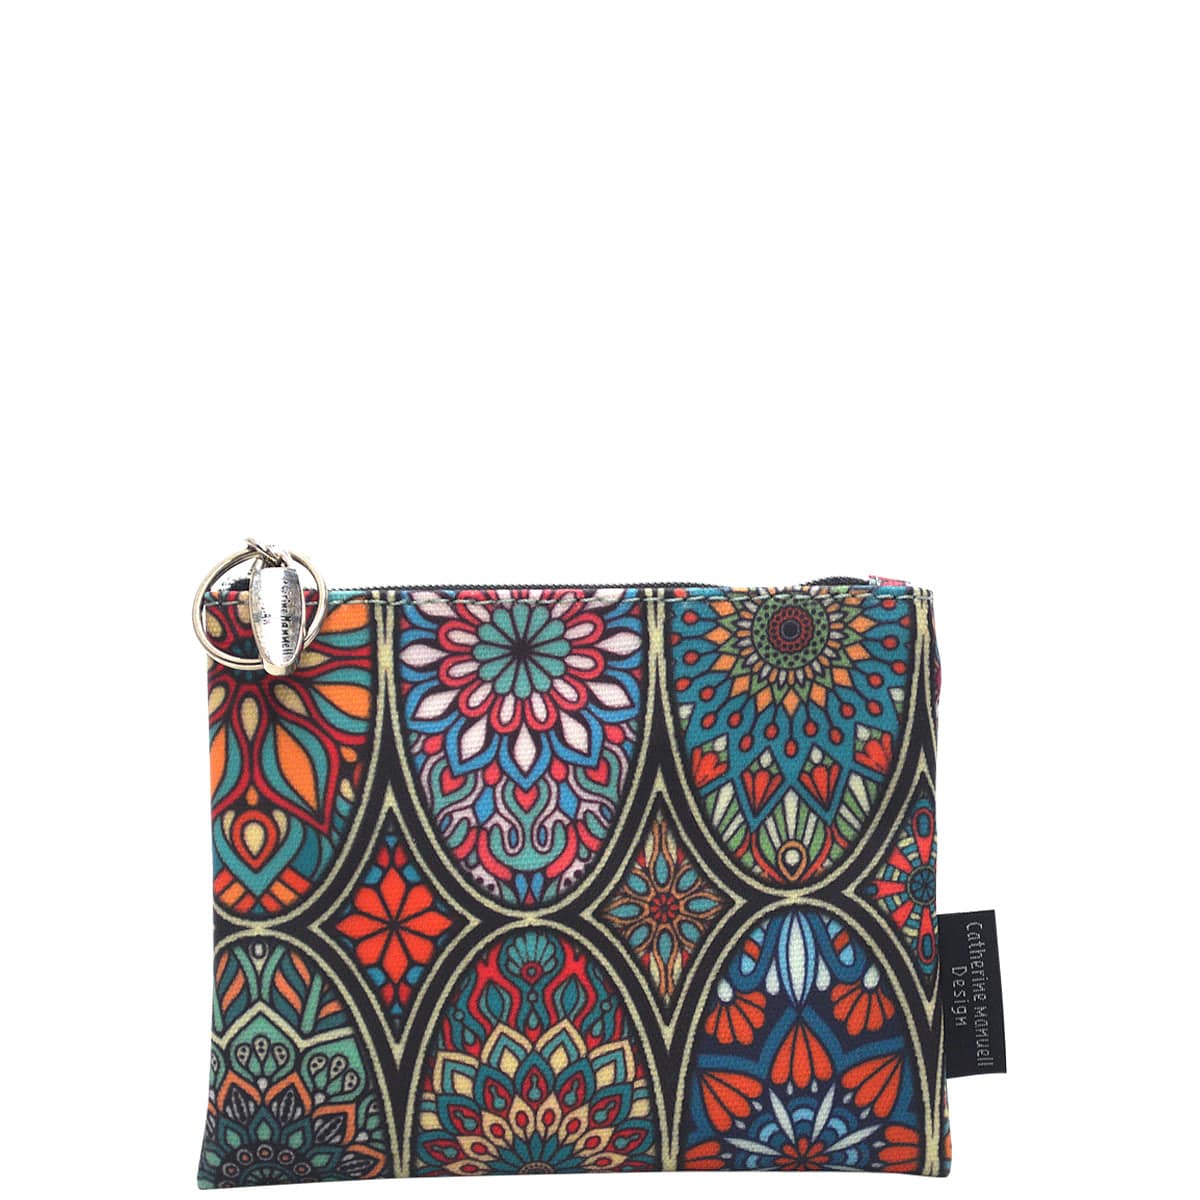 Everyday Purse - Colourful Ovals